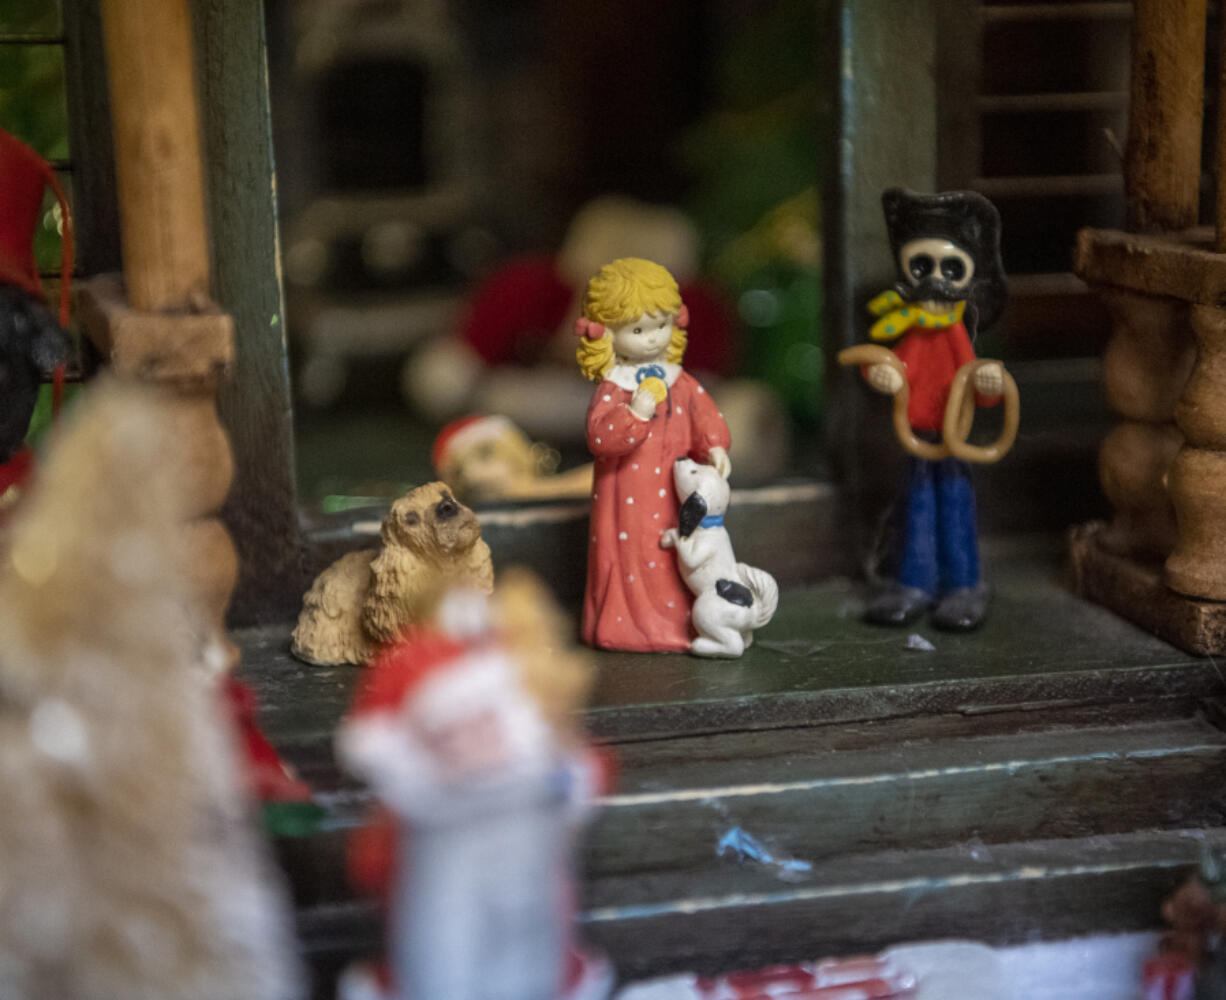 A small figurine of a person and a dog sits in front of a decorated dollhouse on at Susie's Country Inn for Dogs and Cats on Northeast 159th Street near Brush Prairie.